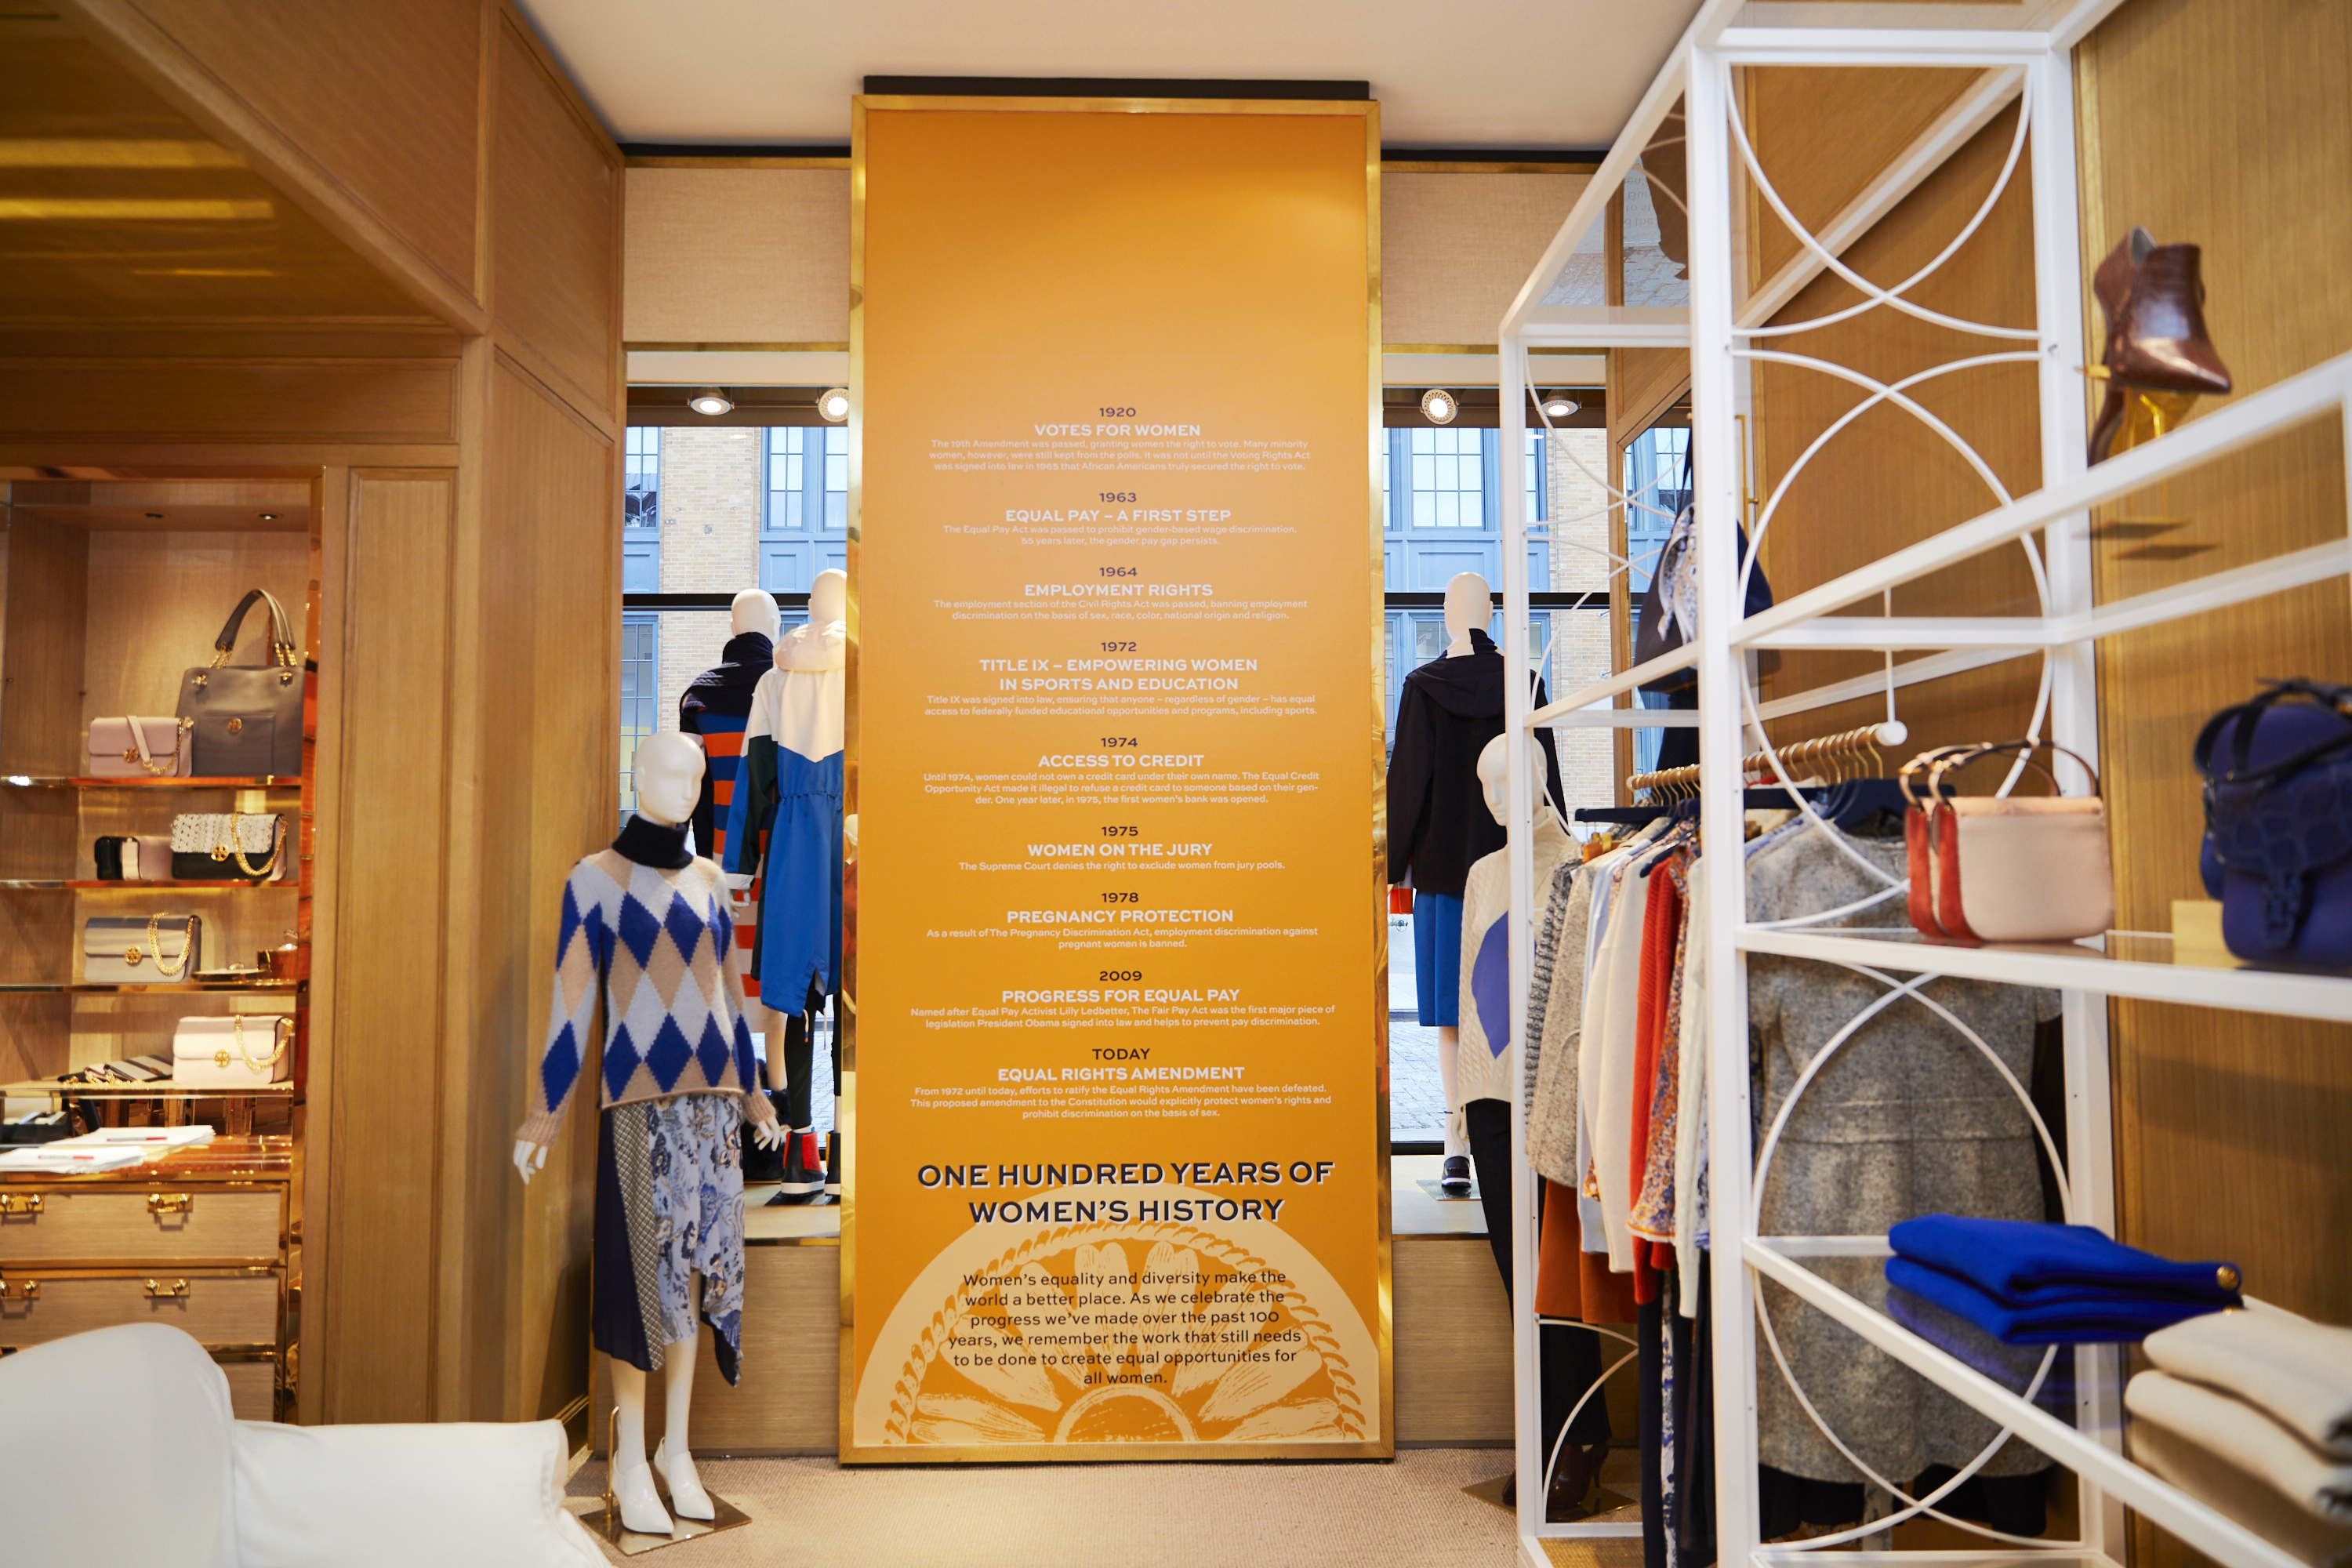 Tory Burch Capsule Collection and Pop Up at Nordstrom NYC